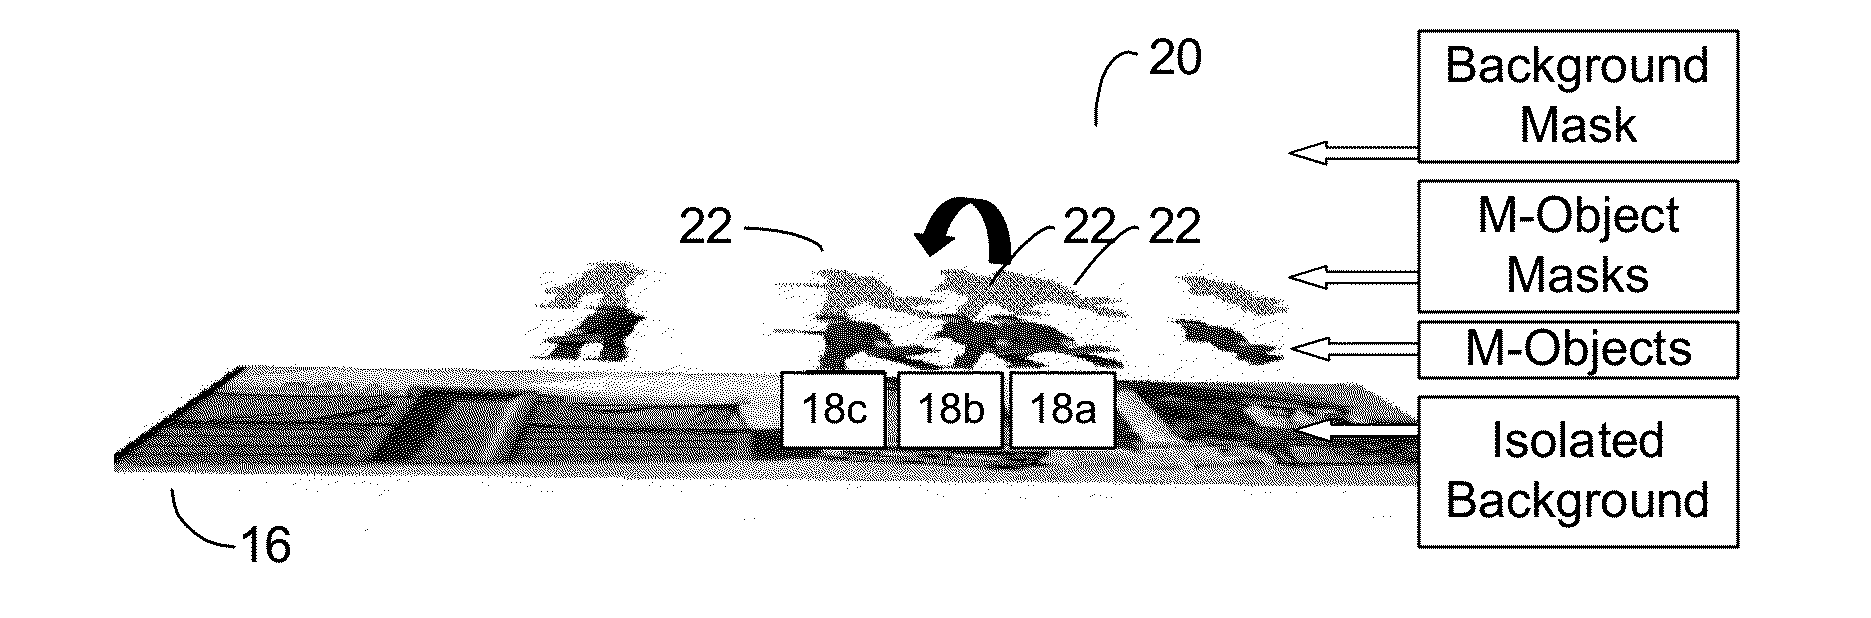 Image sequence enhancement and motion picture project management system